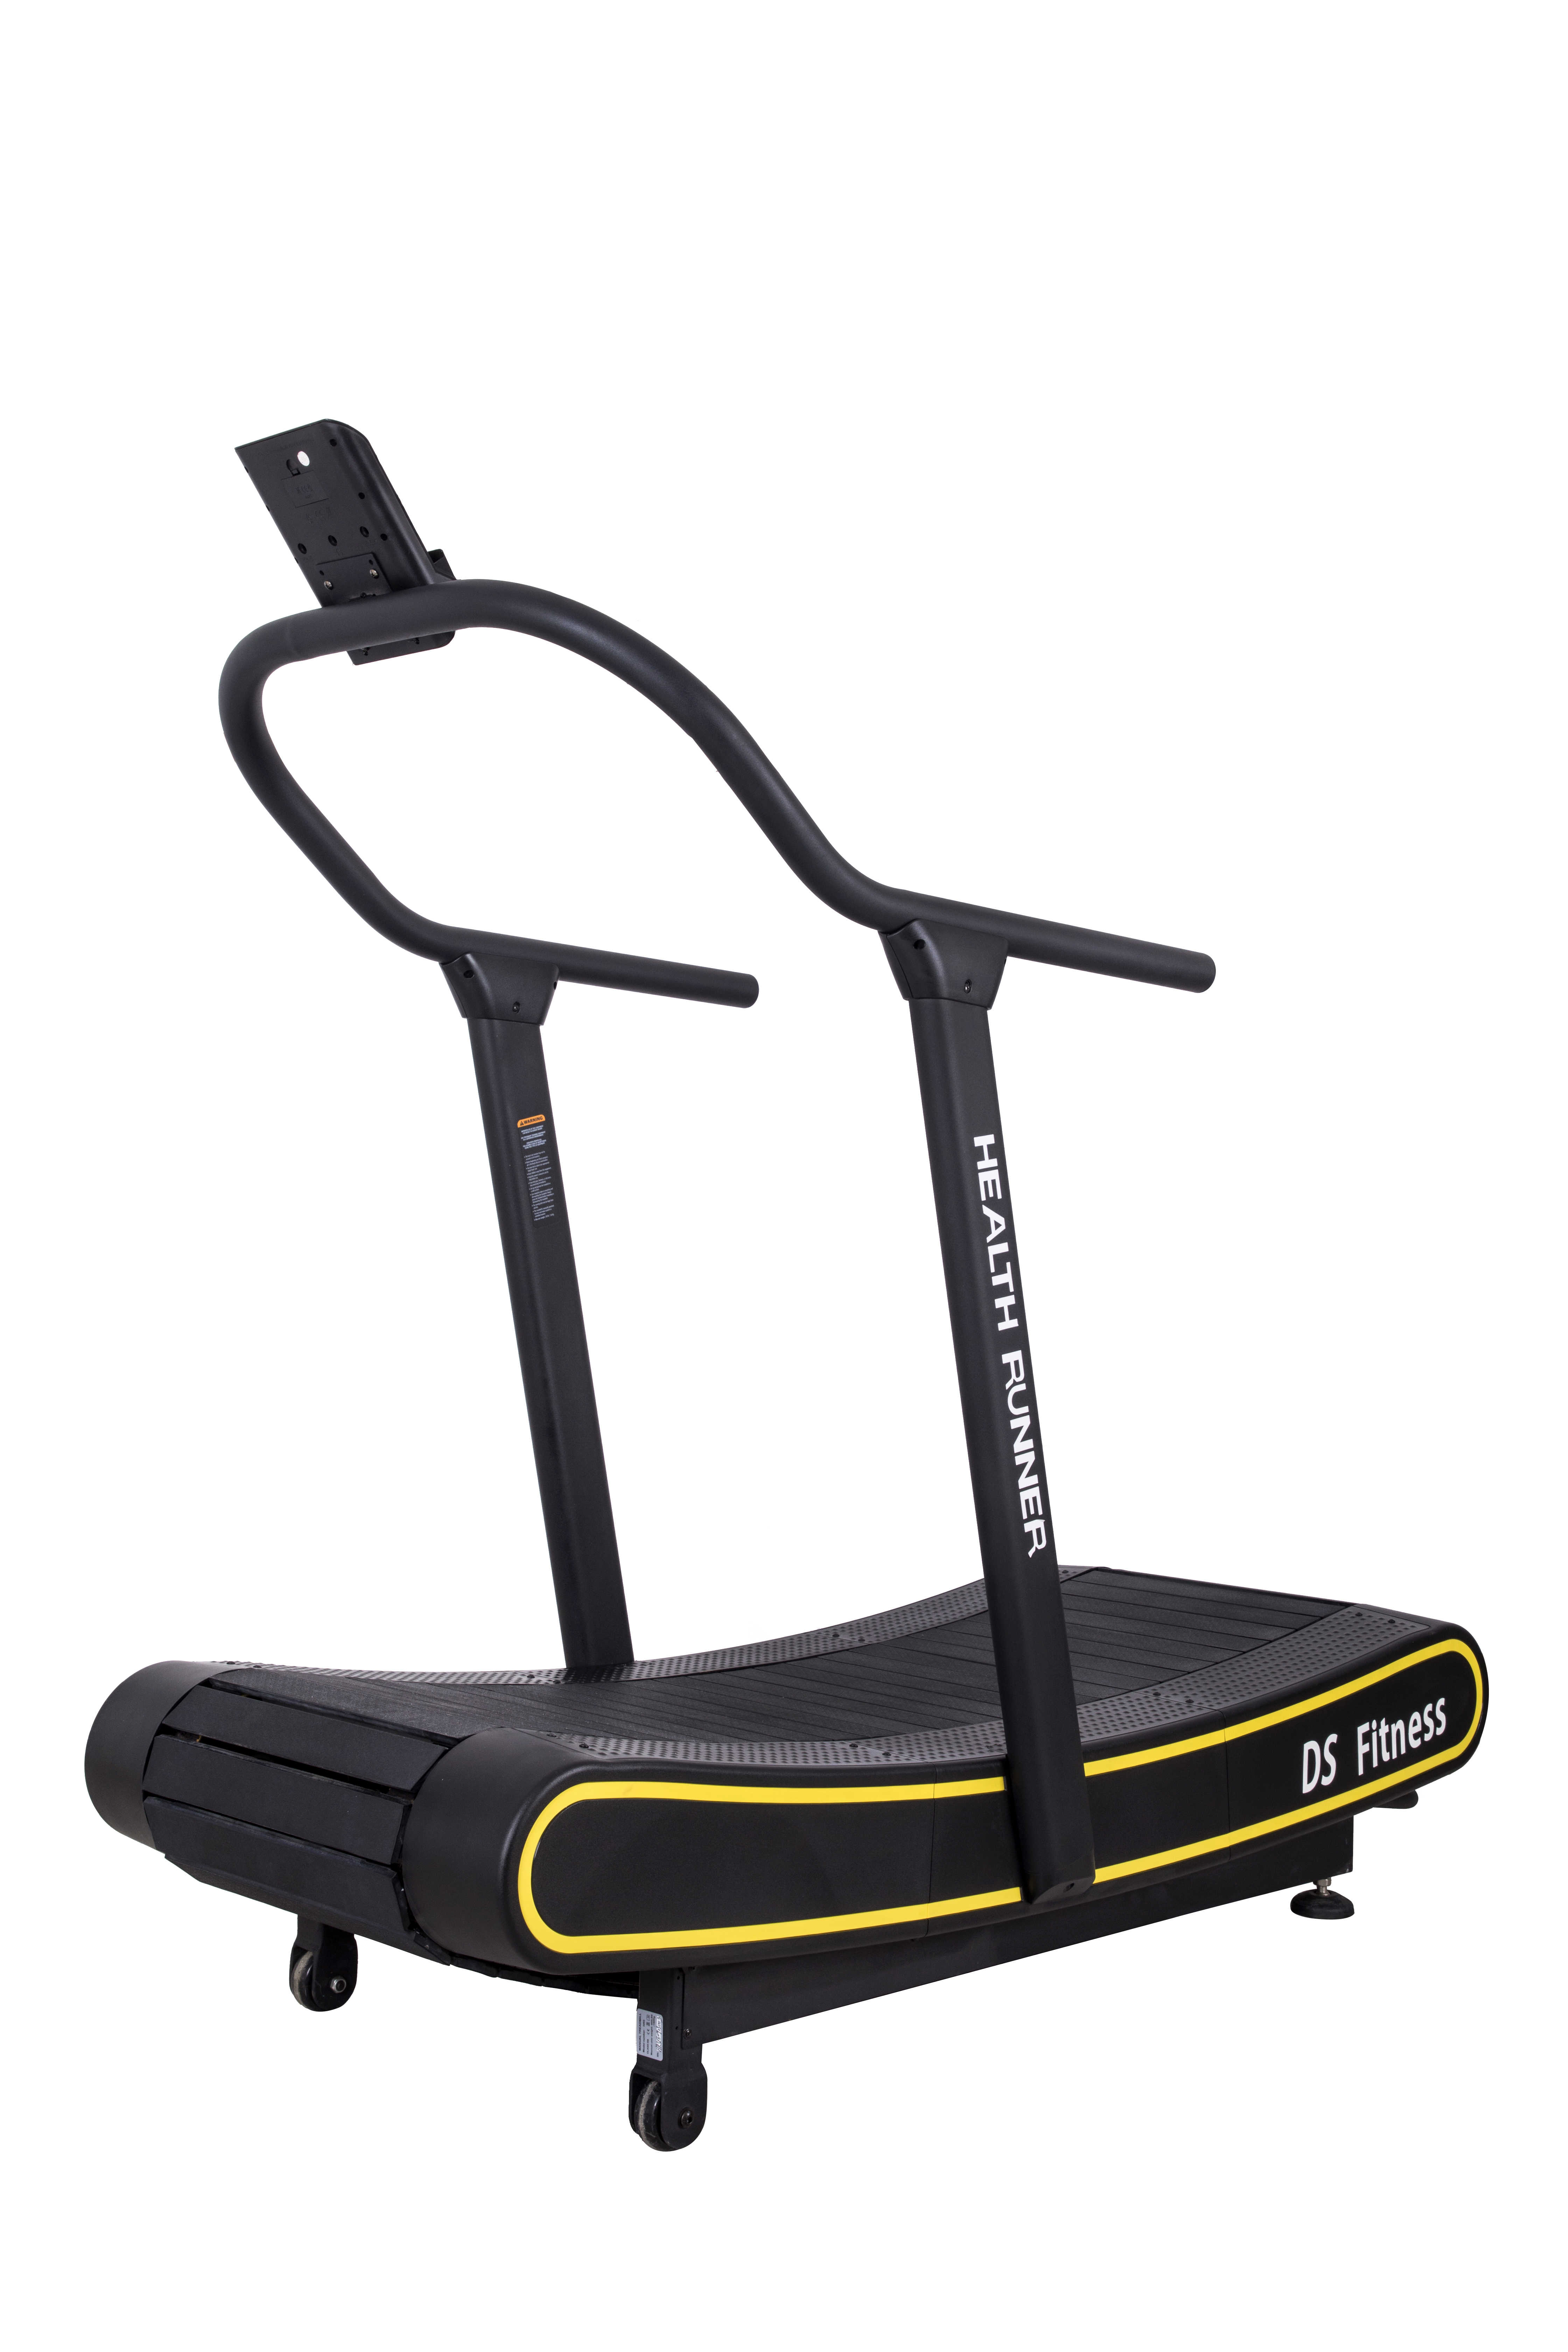 Motorless Magnetic Gymnasium Commercial Curved Treadmill